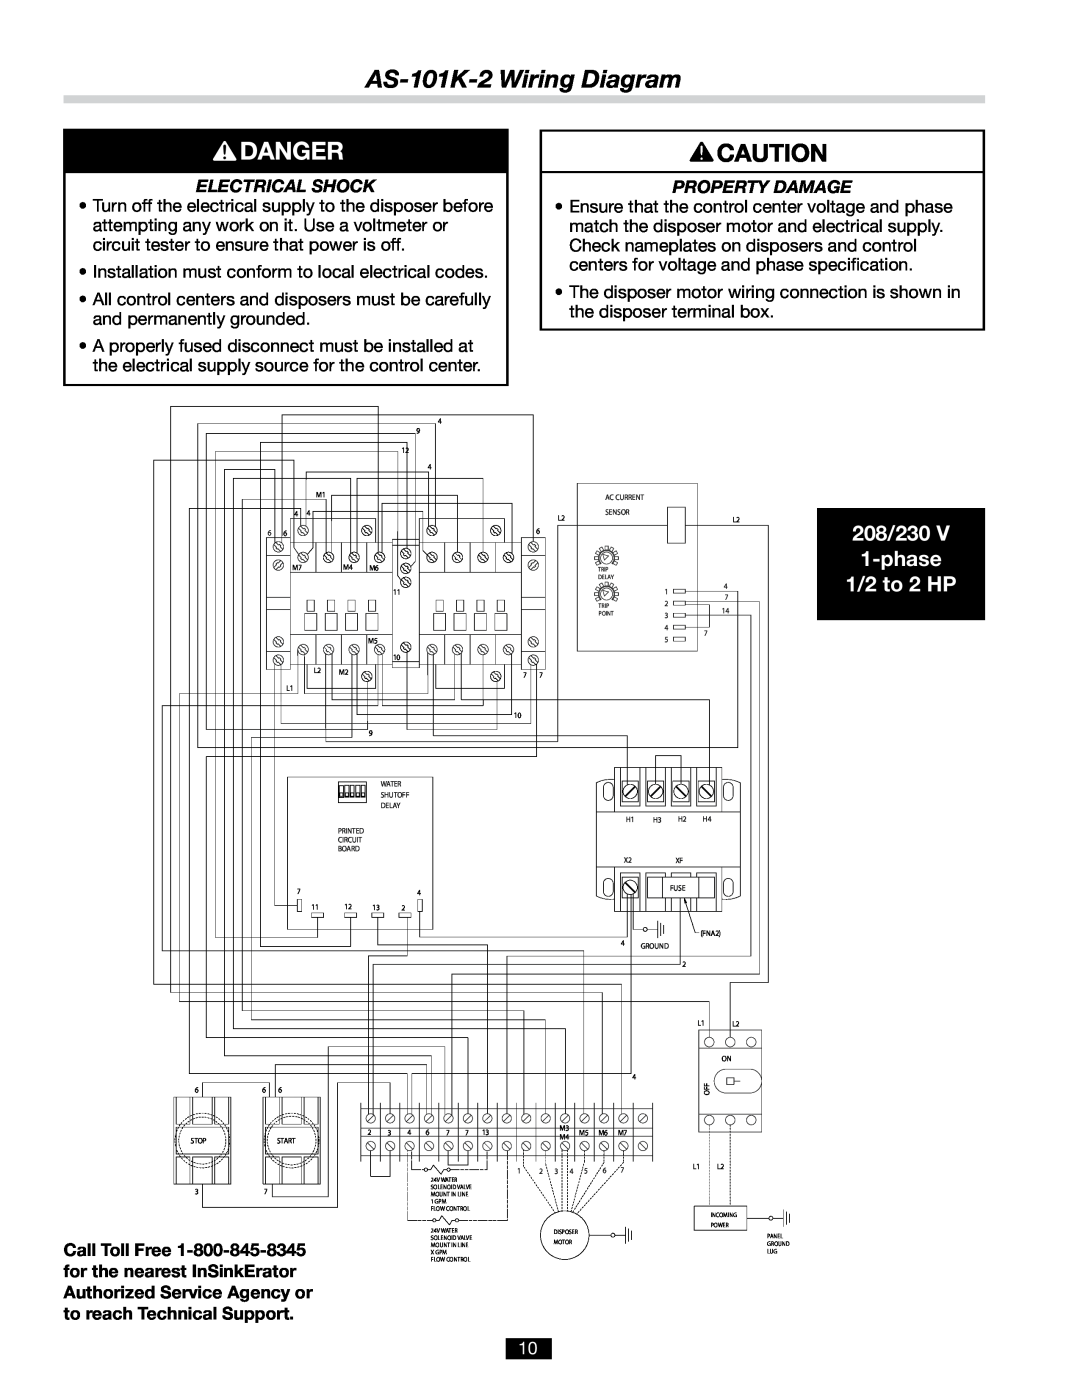 InSinkErator AS-101K-2 Wiring Diagram, 208/230 1-phase 1/2 to 2 HP, Electrical Shock, Property Damage, Call Toll Free 